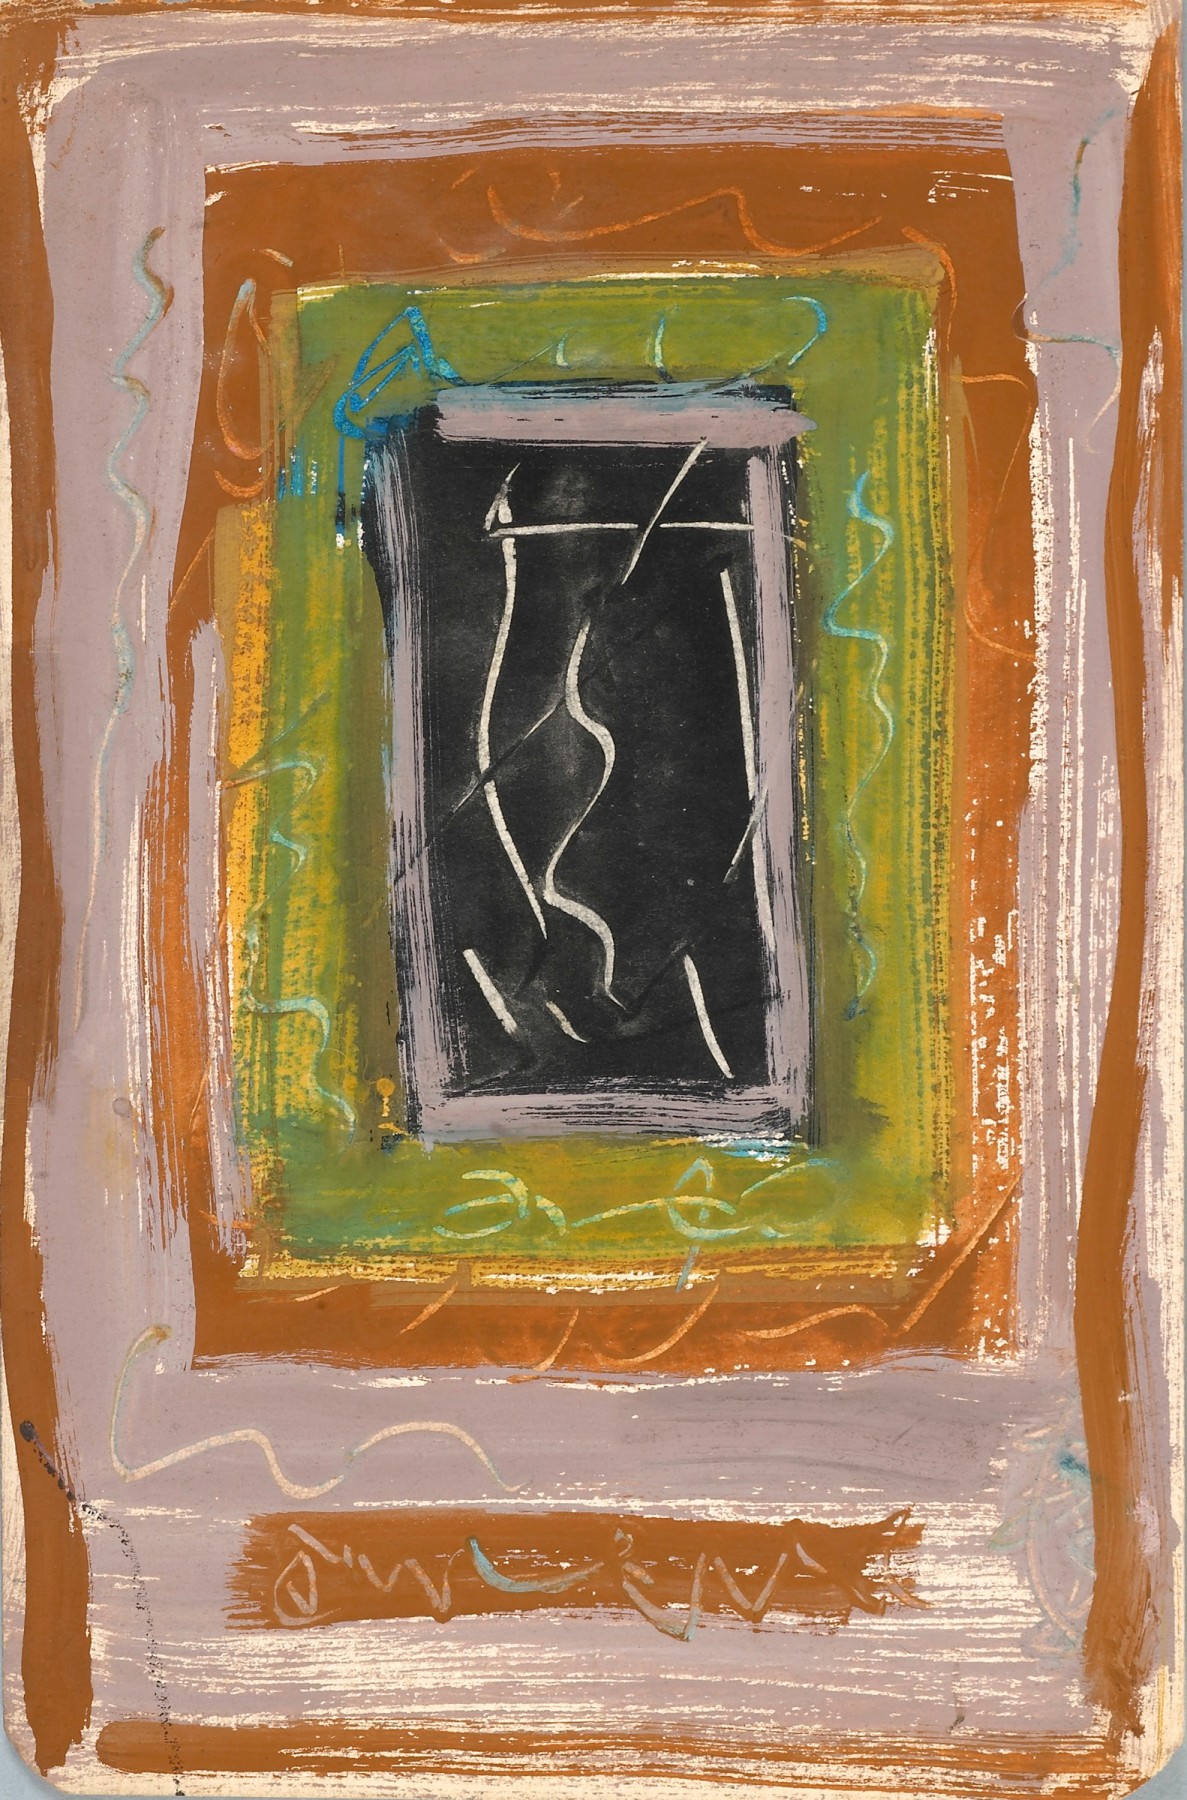 Betty Parsons, Southold, 1952